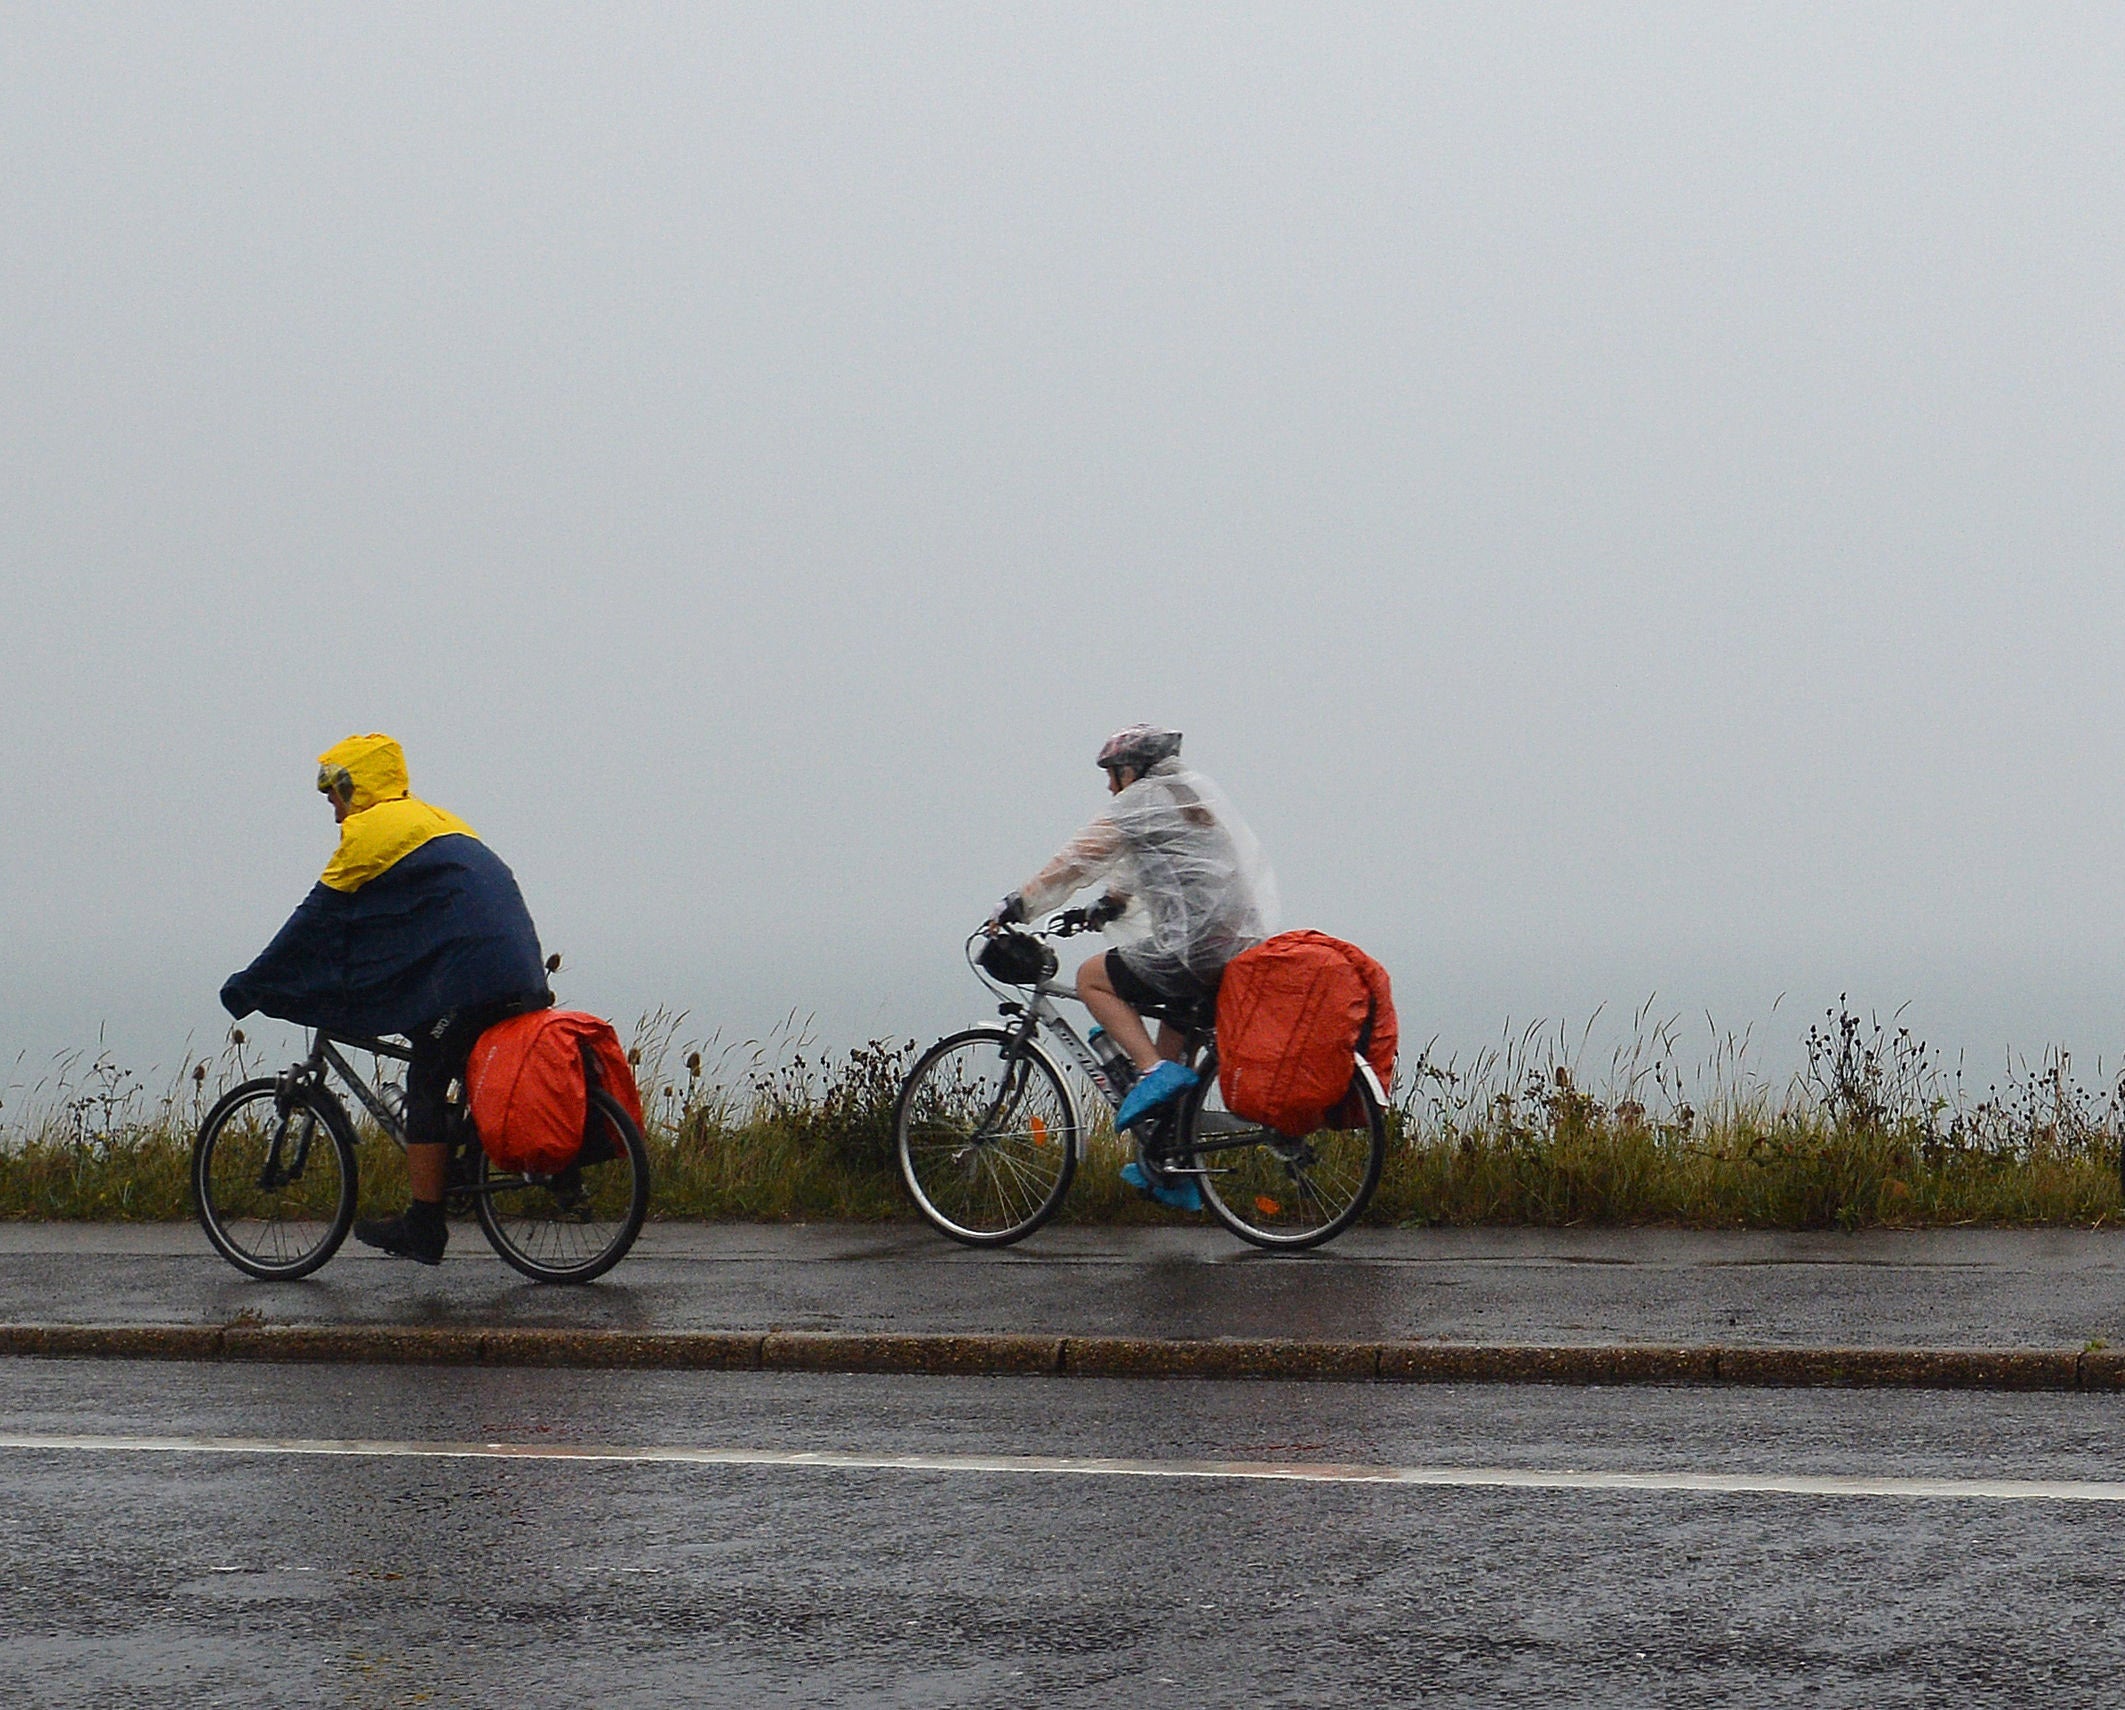 Cyclists battle the elements on the south coast as heavy rains sweep across the South West of England